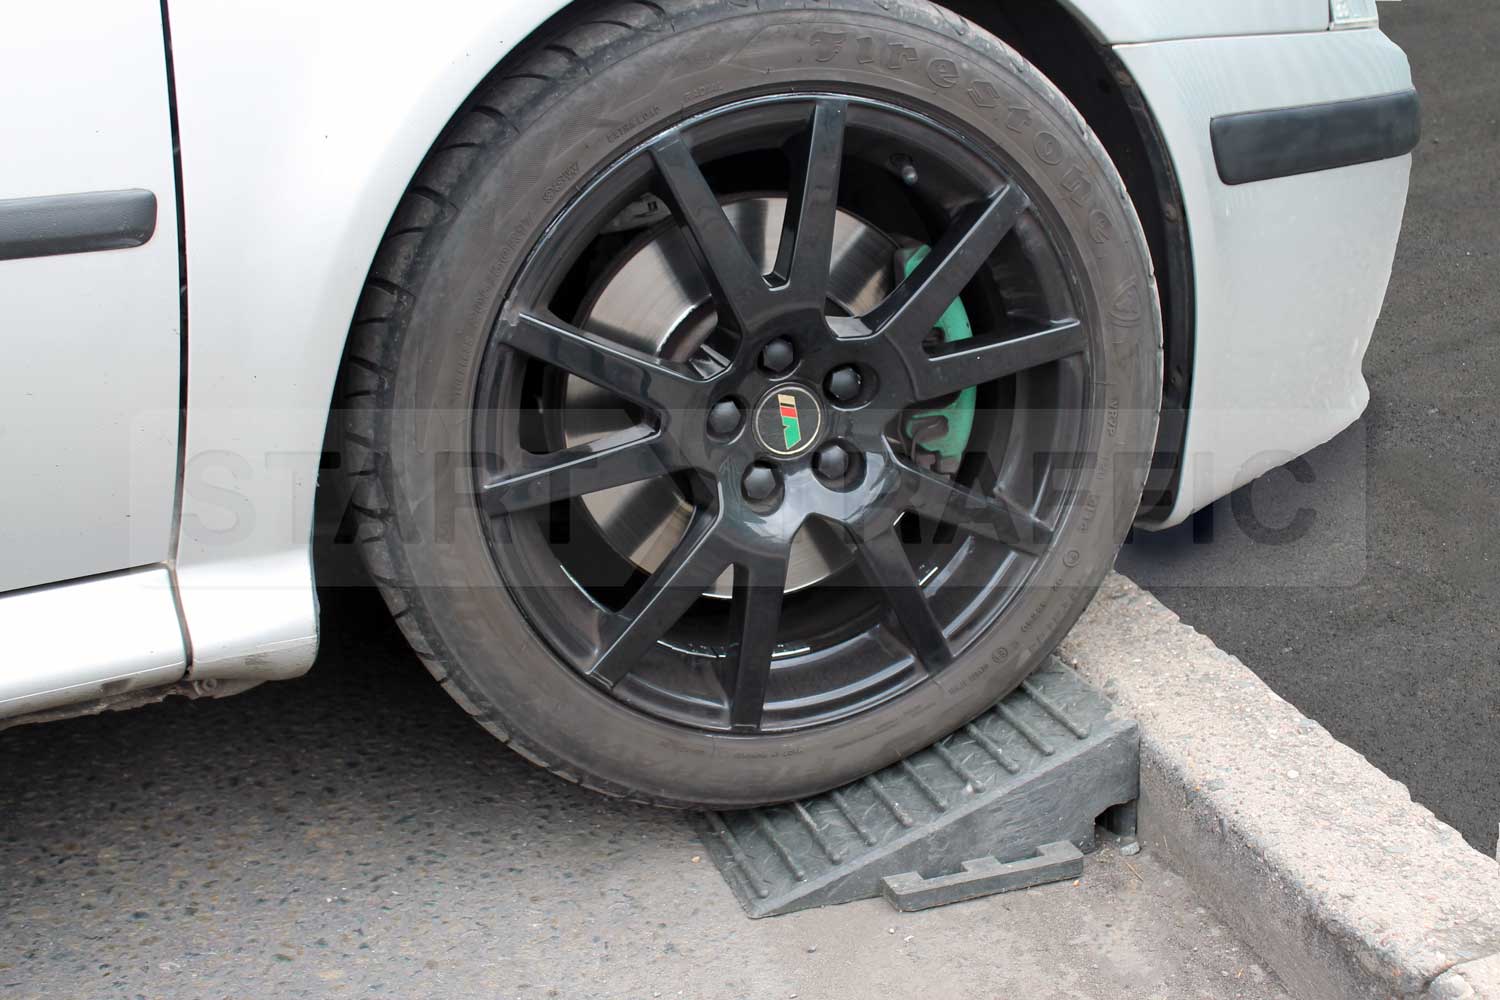 Kerb Wedge for Cars in use